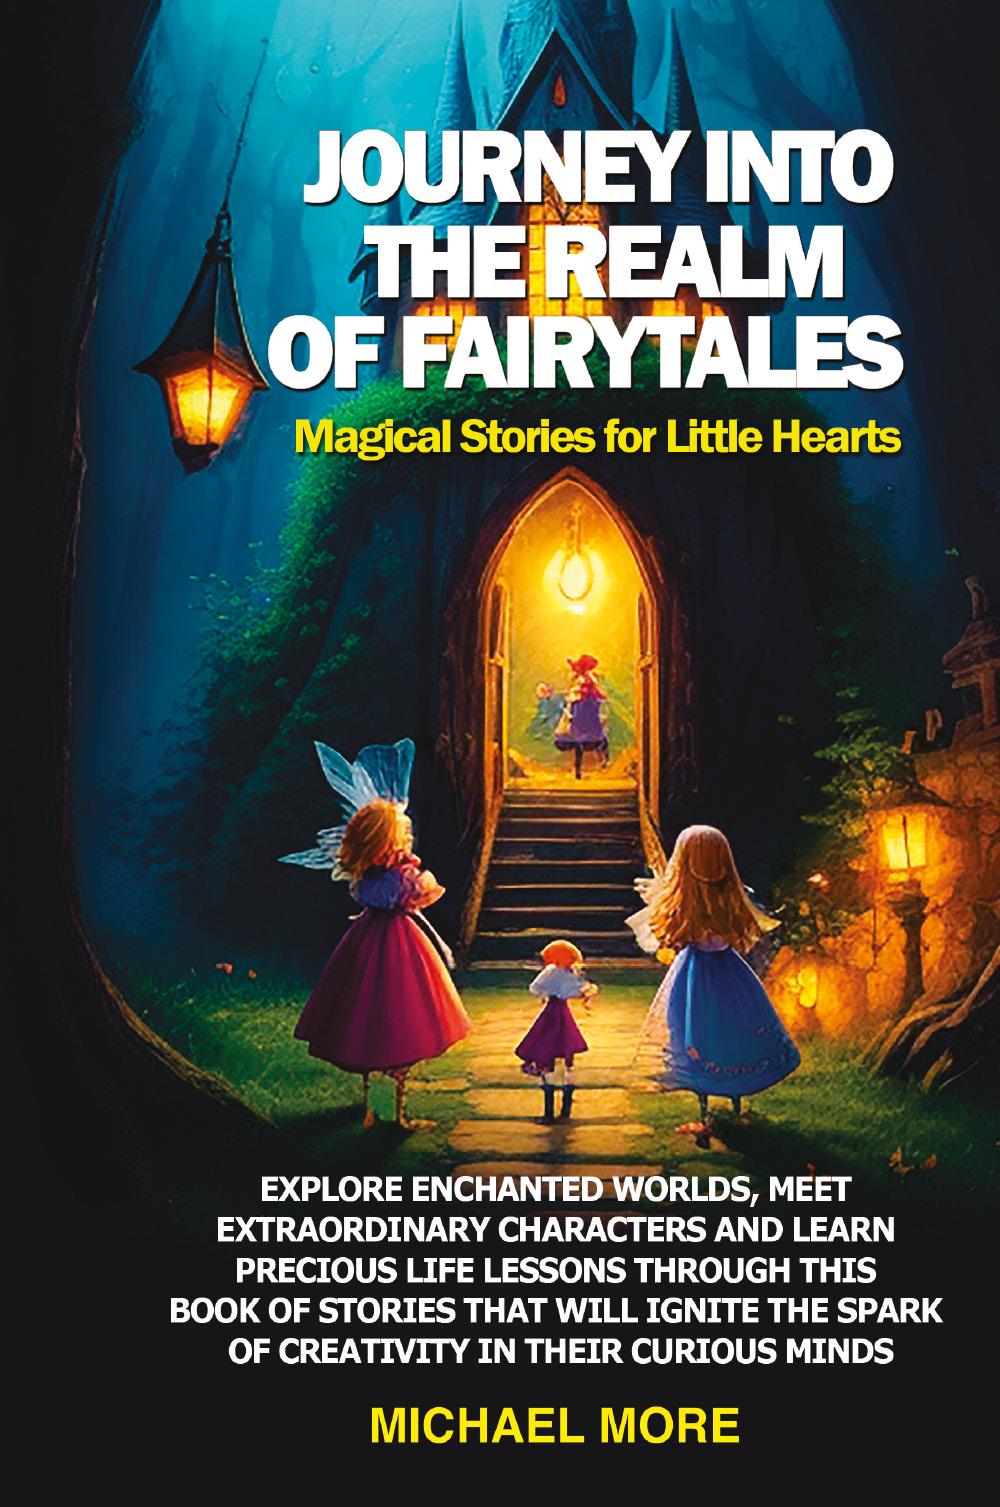 Journey into the Realm of Fairytales: Magical Stories for Little Hearts